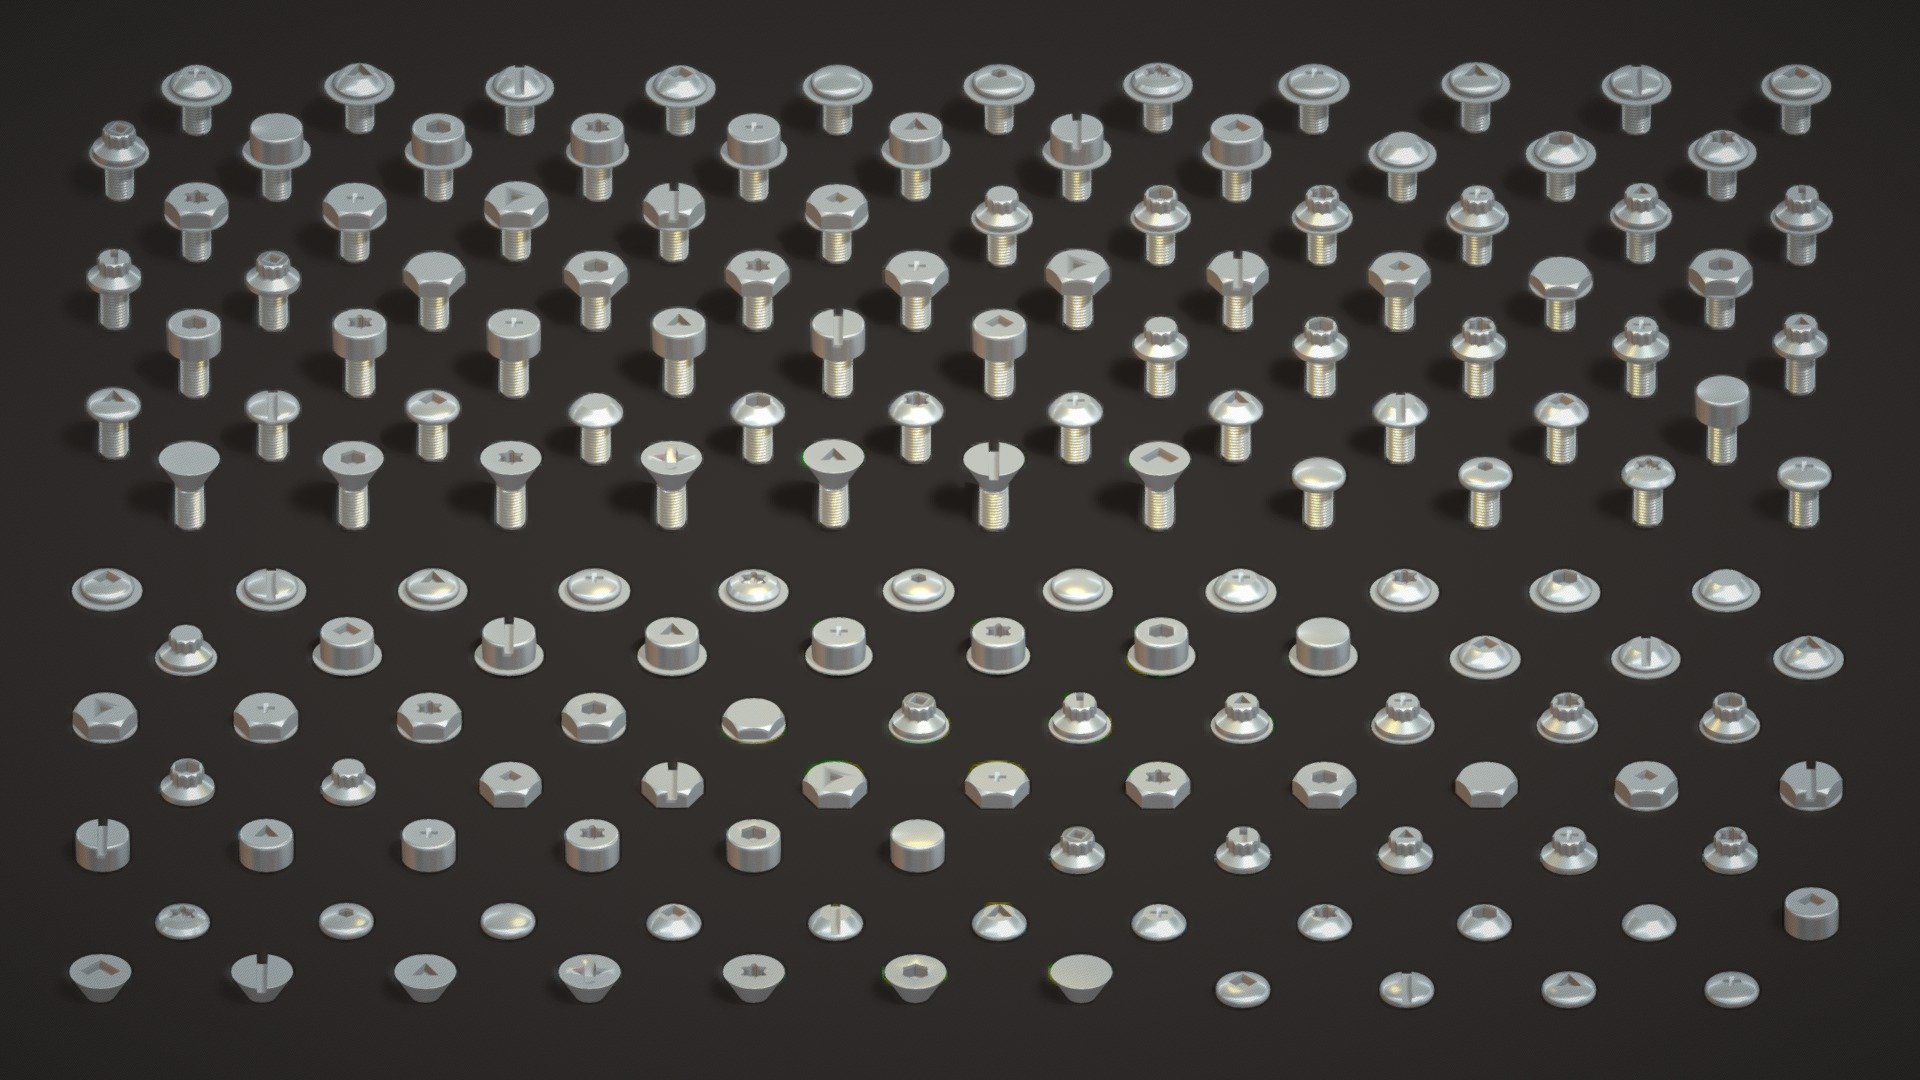 Pack of different types of screws and Bolts.

77 Separated Heads


77 Bolts and Screw Lowpoly Models




Realistic Metallic Screw and Bolt pack can be used for industrial props and accessories.



Base Models for any screw model

Included Files:

- This pack includes the Blend file format.
- Additional Zip File Include: Separate (FBX, OBJ, GLB, STL) for Each Model




This meticulously crafted 3D model collection is designed for easy printing and adds a touch of realism to your creations.

Perfect for 3D printing enthusiasts, hobbyists, and DIYers, this pack is a must-have for bringing precision and authenticity to your projects.

Download the Bolt Screw Pack now and infuse your DIY projects with precision and realism.
Simplify your crafting process with these low poly, realistic, and printable bolts and screws - a perfect addition to any maker's toolkit! 🔩🛠️🎨 - Bolt & Screw Pack Low Poly Realistic Collection - Buy Royalty Free 3D model by Laxminarayan Artistry (@LaxminarayanArtistry) 3d model